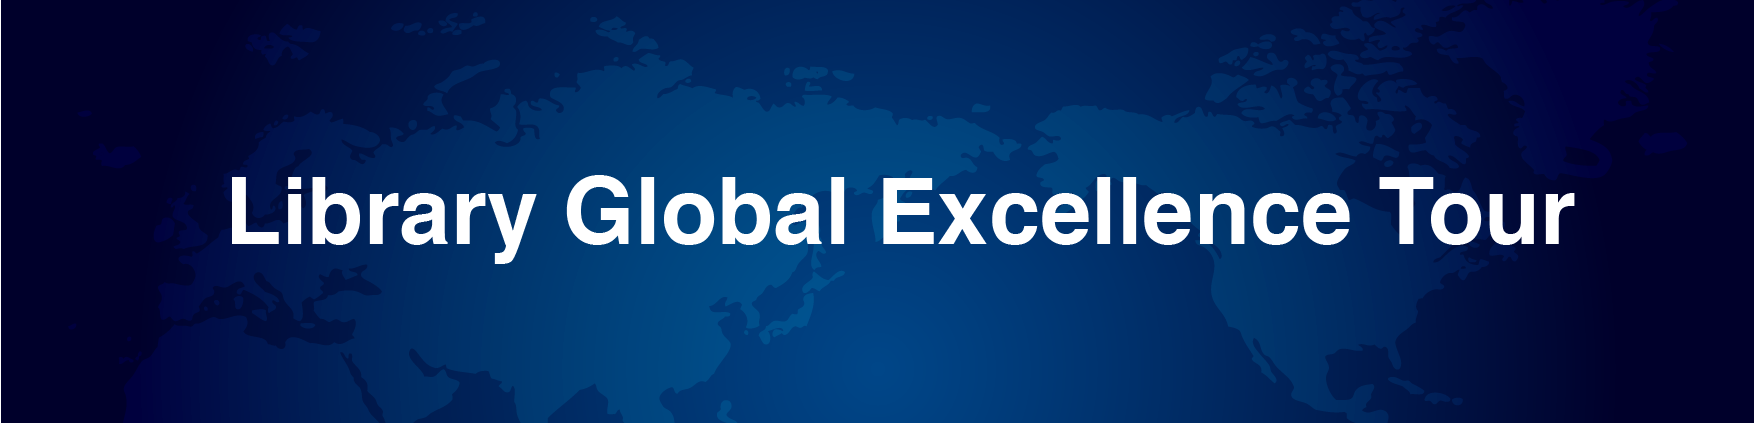 Global Excellence Tour 2017